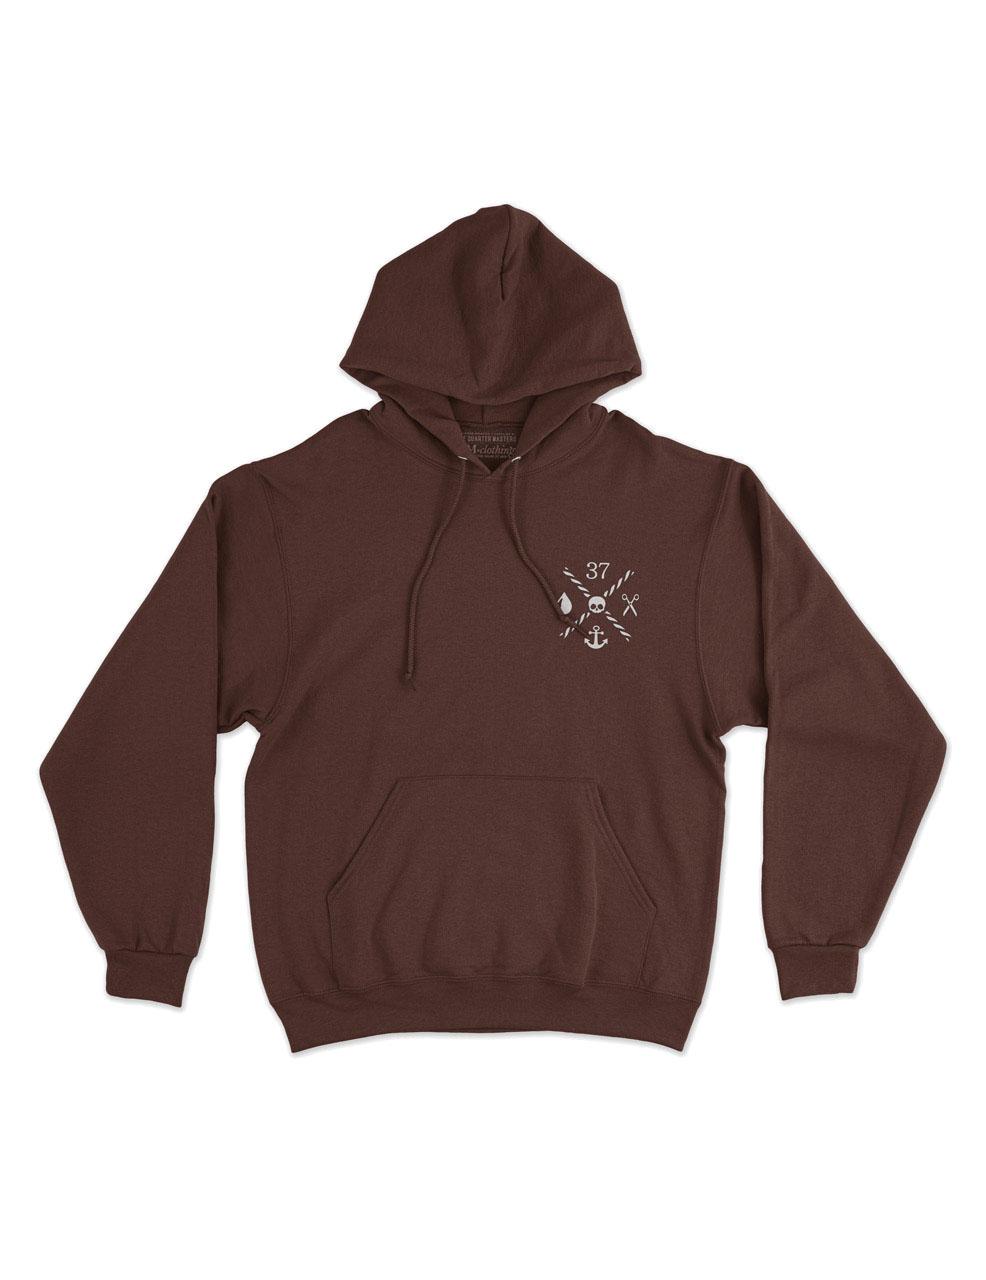 Unisex pullover hoodie — chocolate (front view)